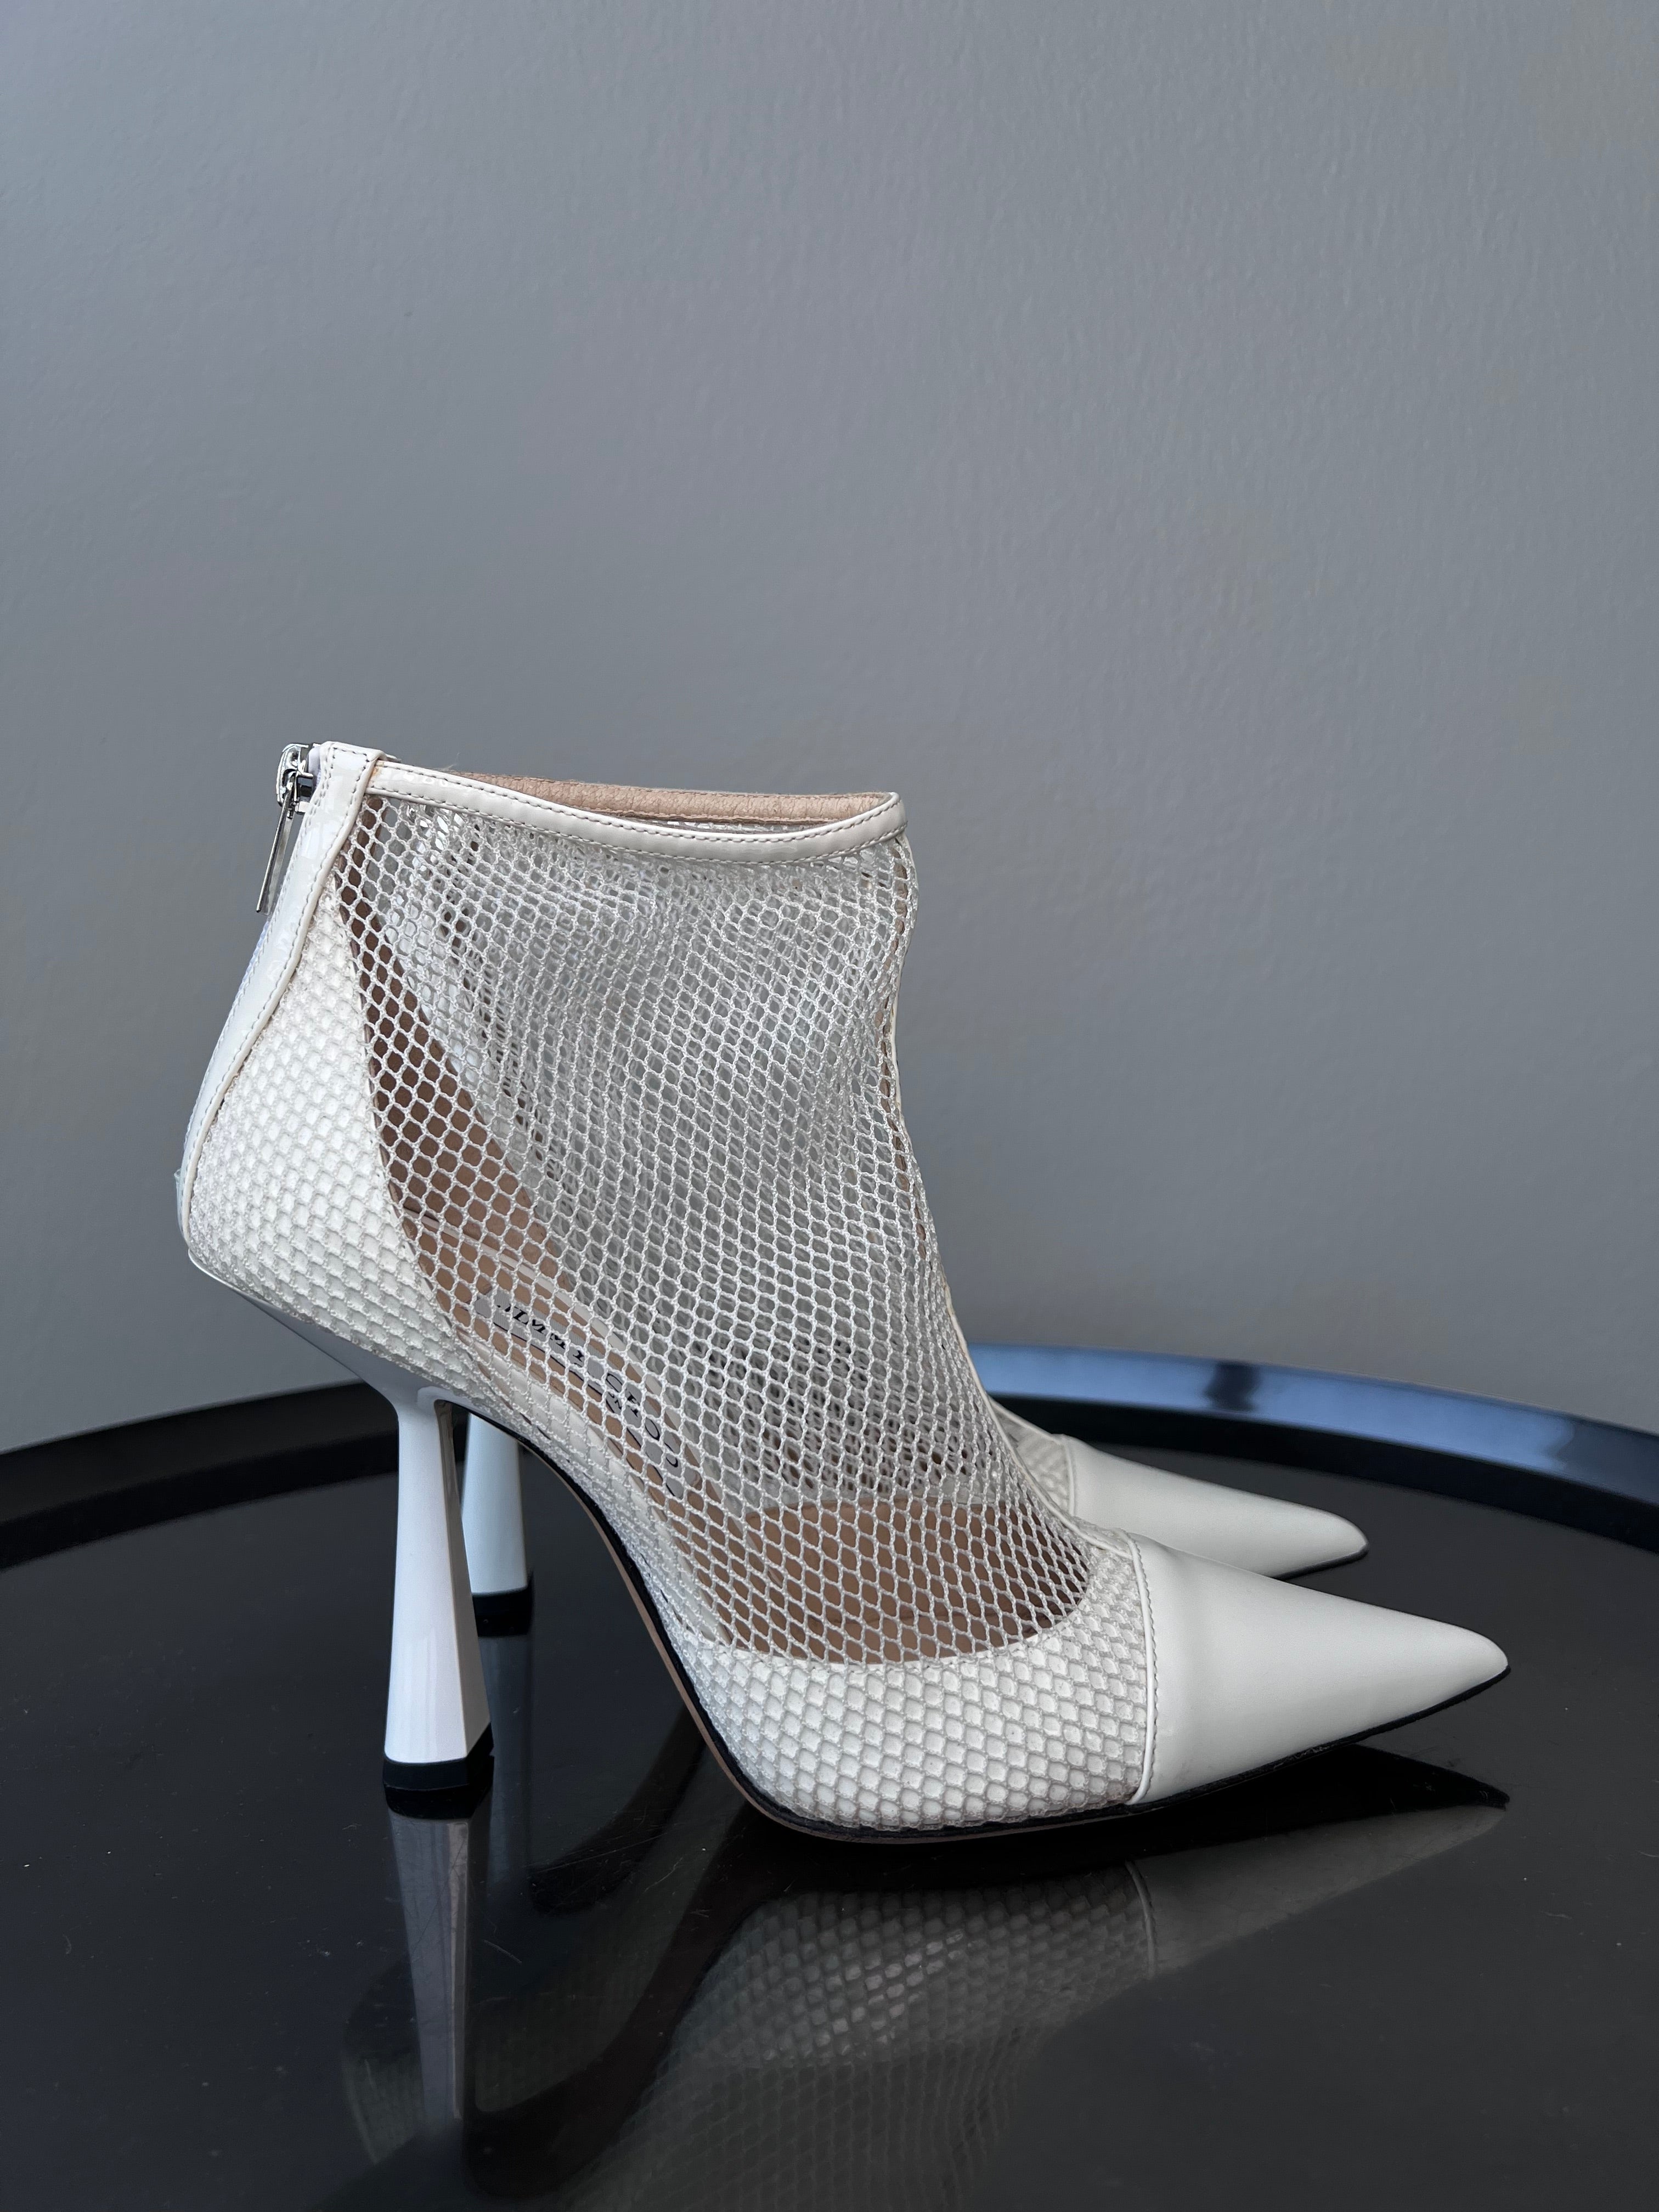 White patent-leather and mesh ankle boots - JIMMY CHOO